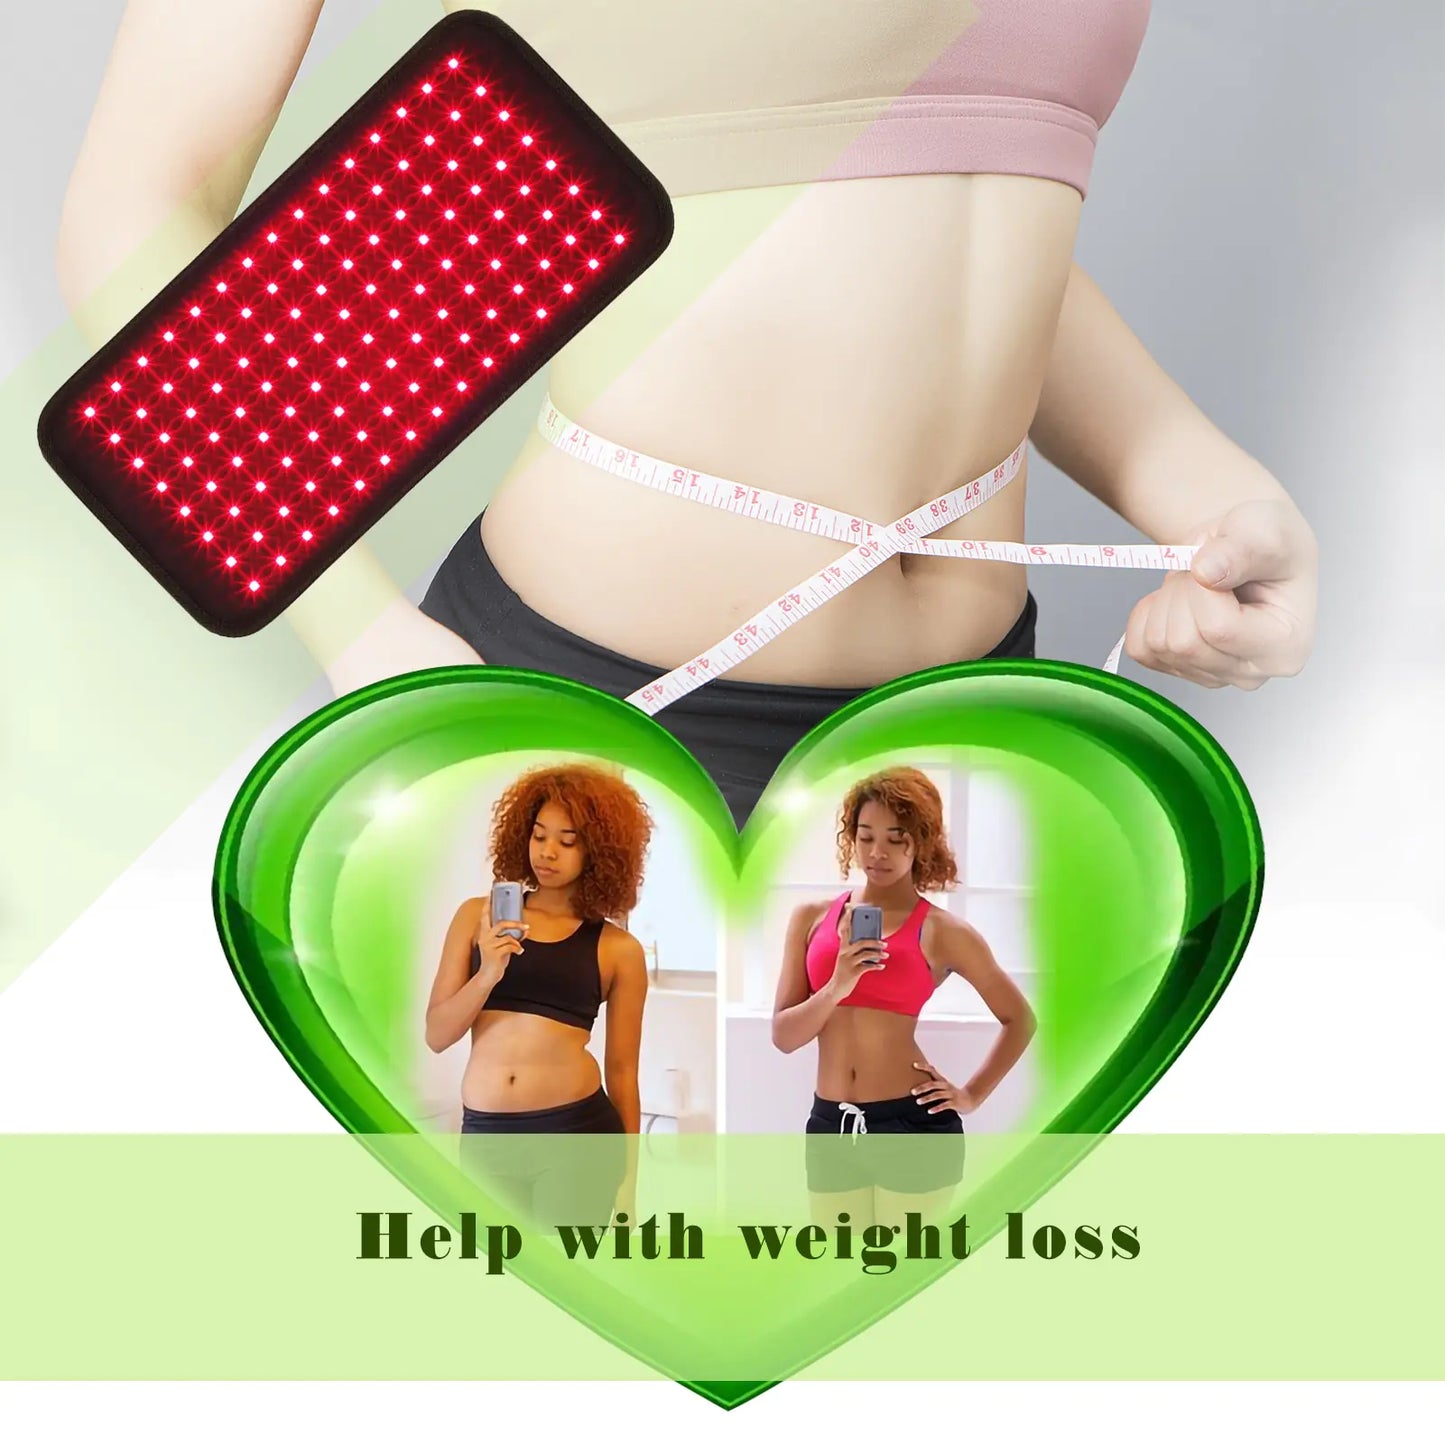 LuminaWrap - Infrared Light Therapy Belt